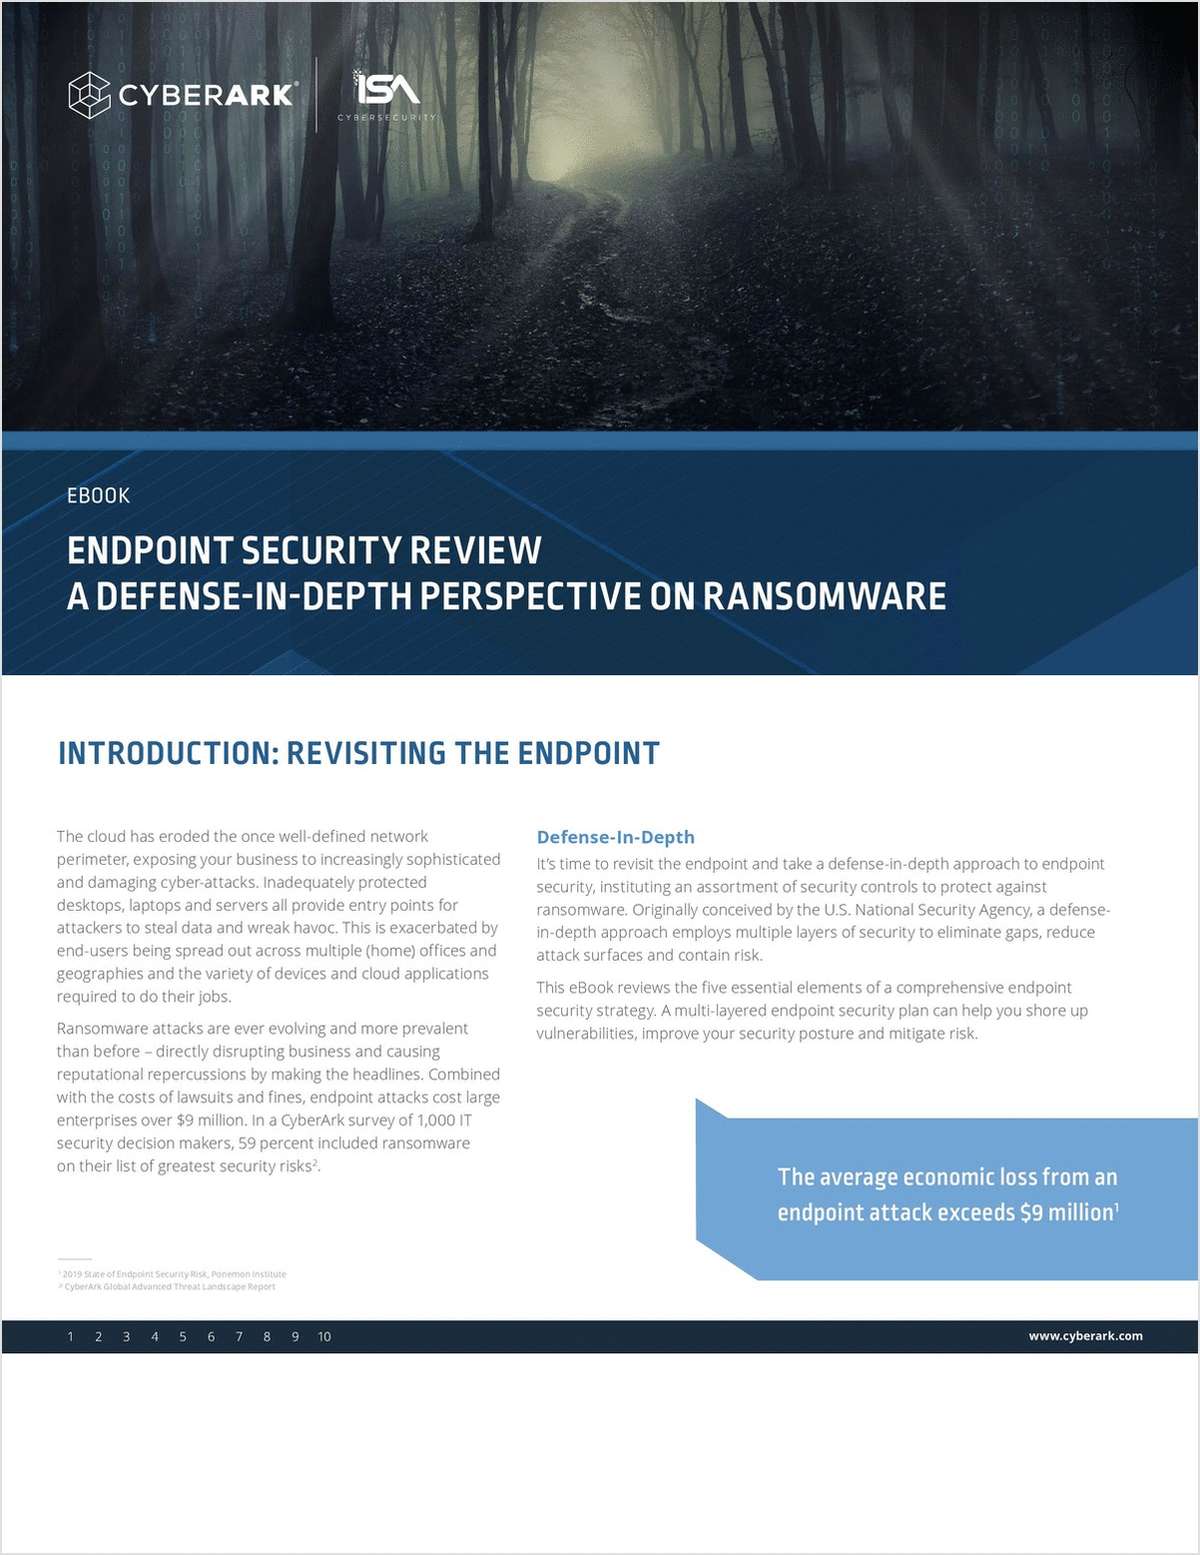 Endpoint Security Revisited: A Defense-in-Depth Perspective On Ransomware